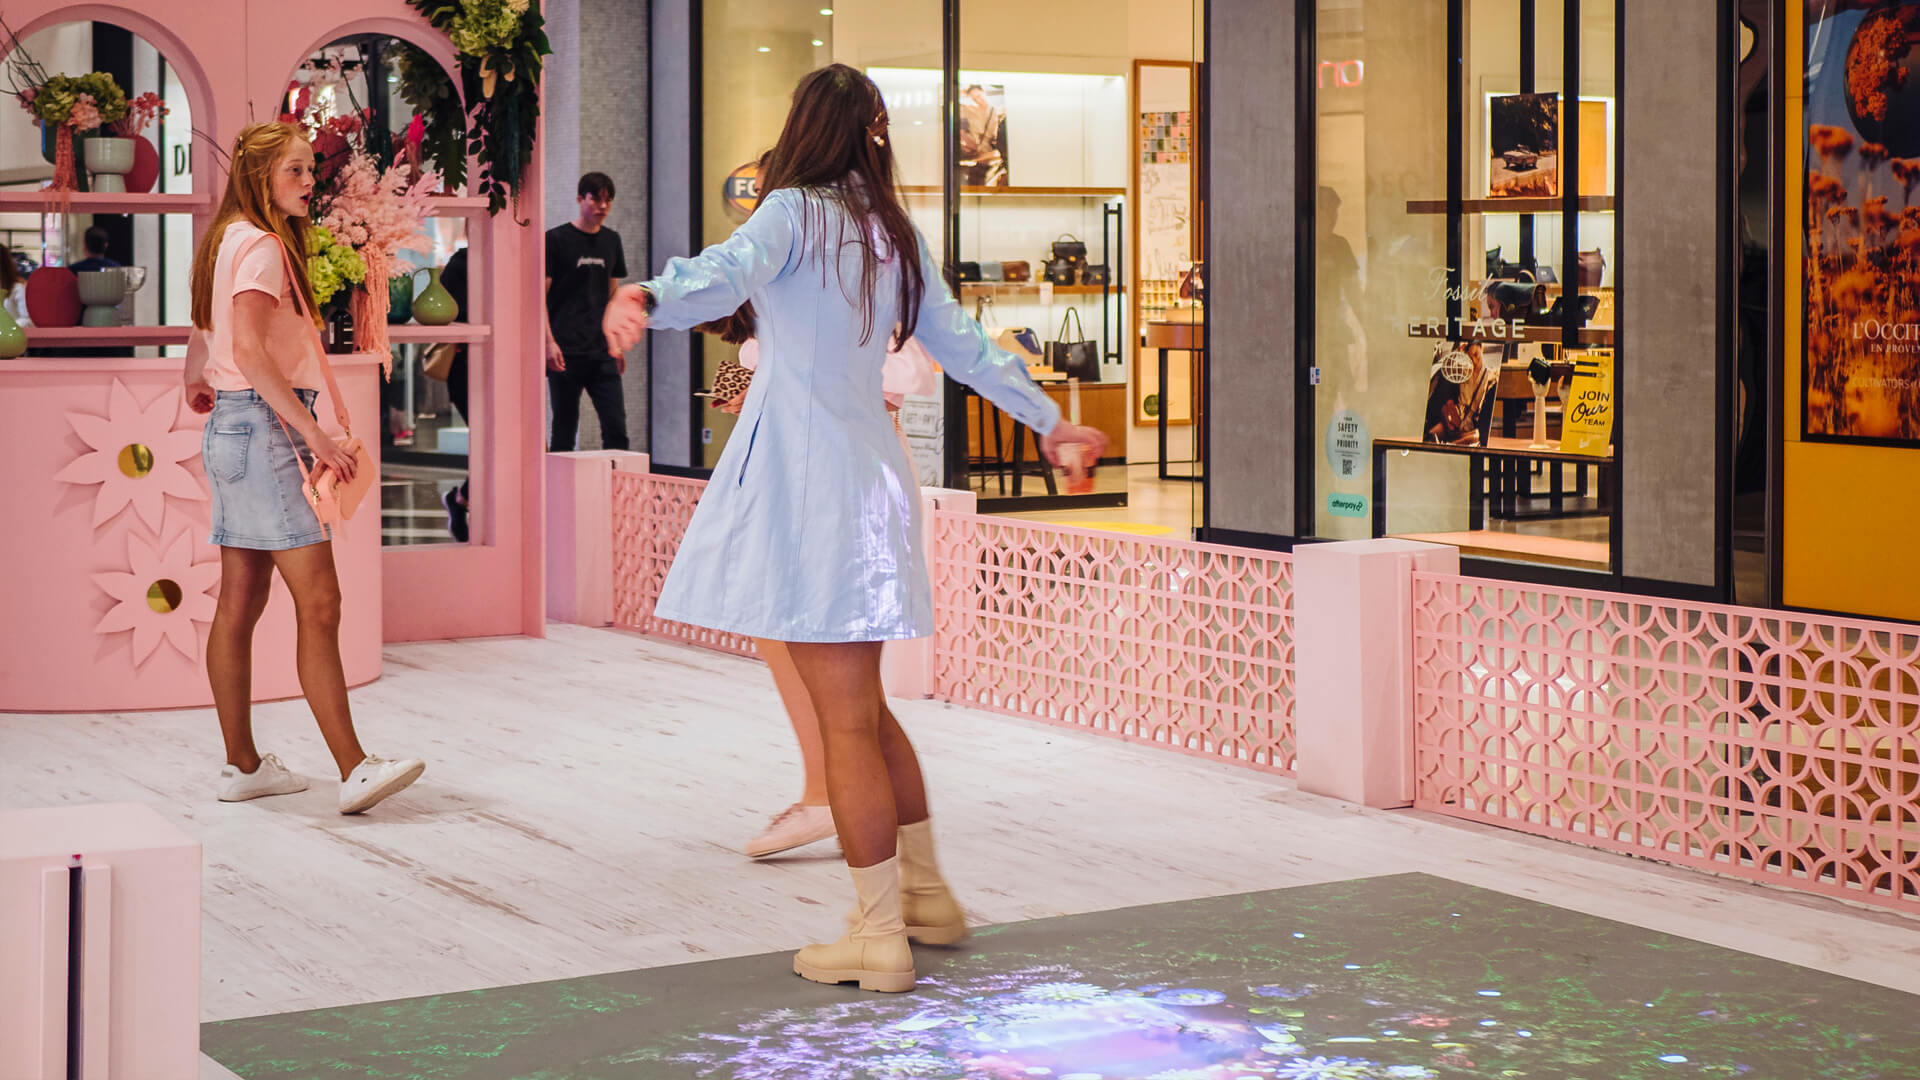 Shoppers enjoying the Macquarie Center Uplifting Spirits Spring experiential brand activation by VANDAL